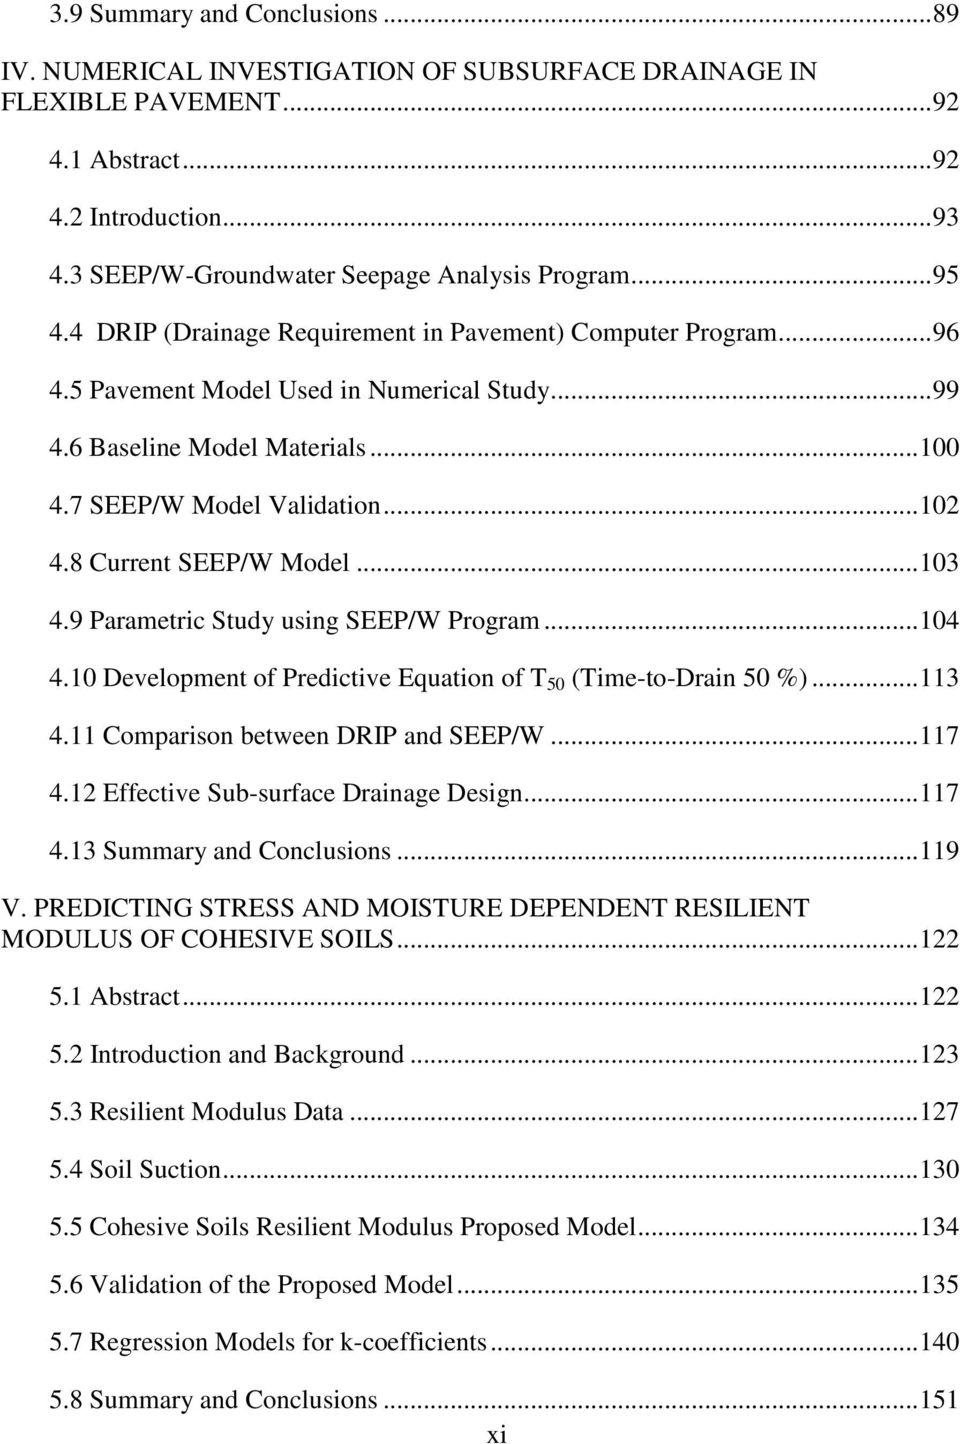 .. 100 4.7 SEEP/W Model Validation... 102 4.8 Current SEEP/W Model... 103 4.9 Parametric Study using SEEP/W Program... 104 4.10 Development of Predictive Equation of T 50 (Time-to-Drain 50 %)... 113 4.